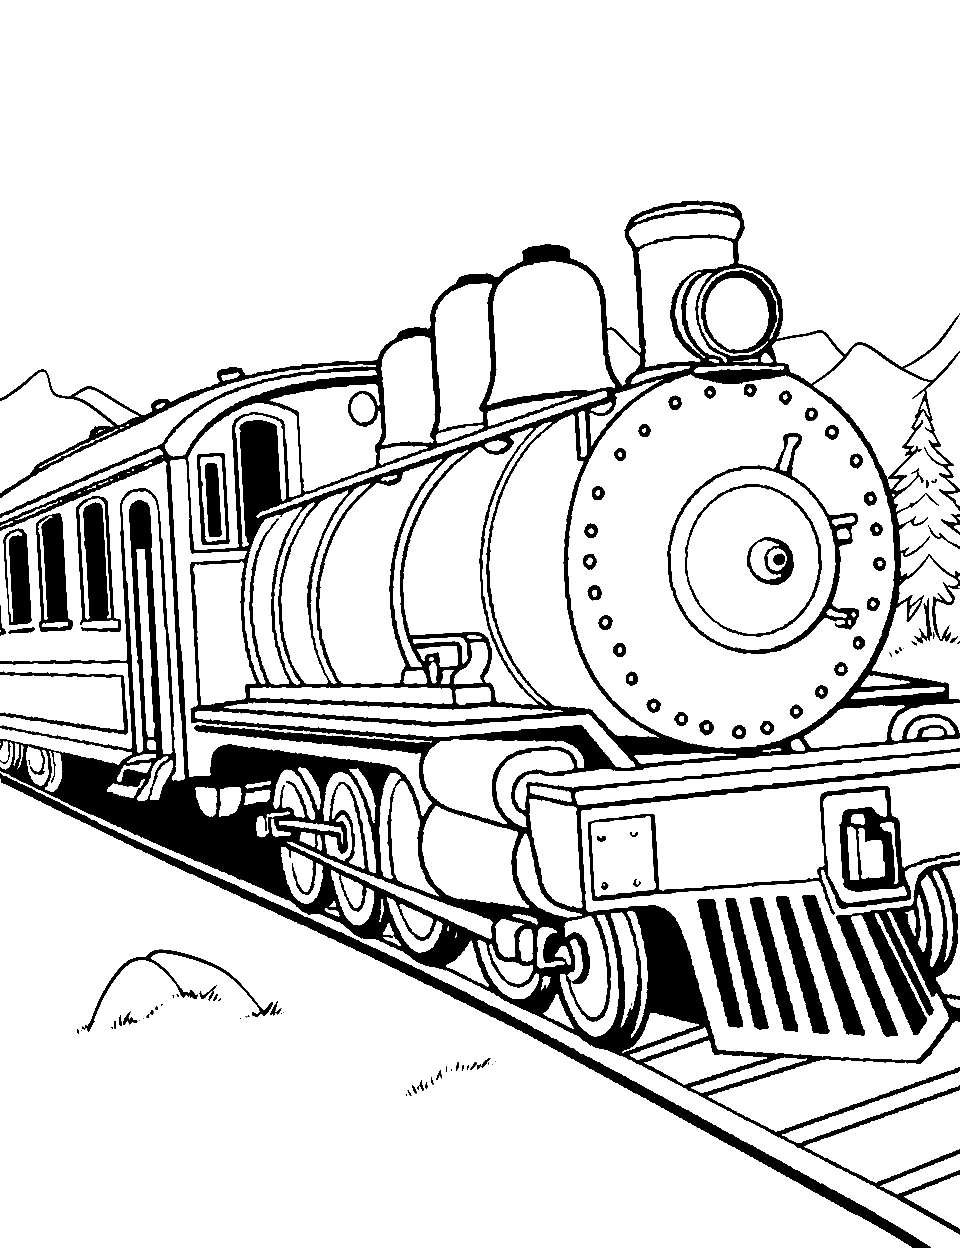 Wild West Gold Rush Train Coloring Page - A train from the era of the Wild West gold rush.